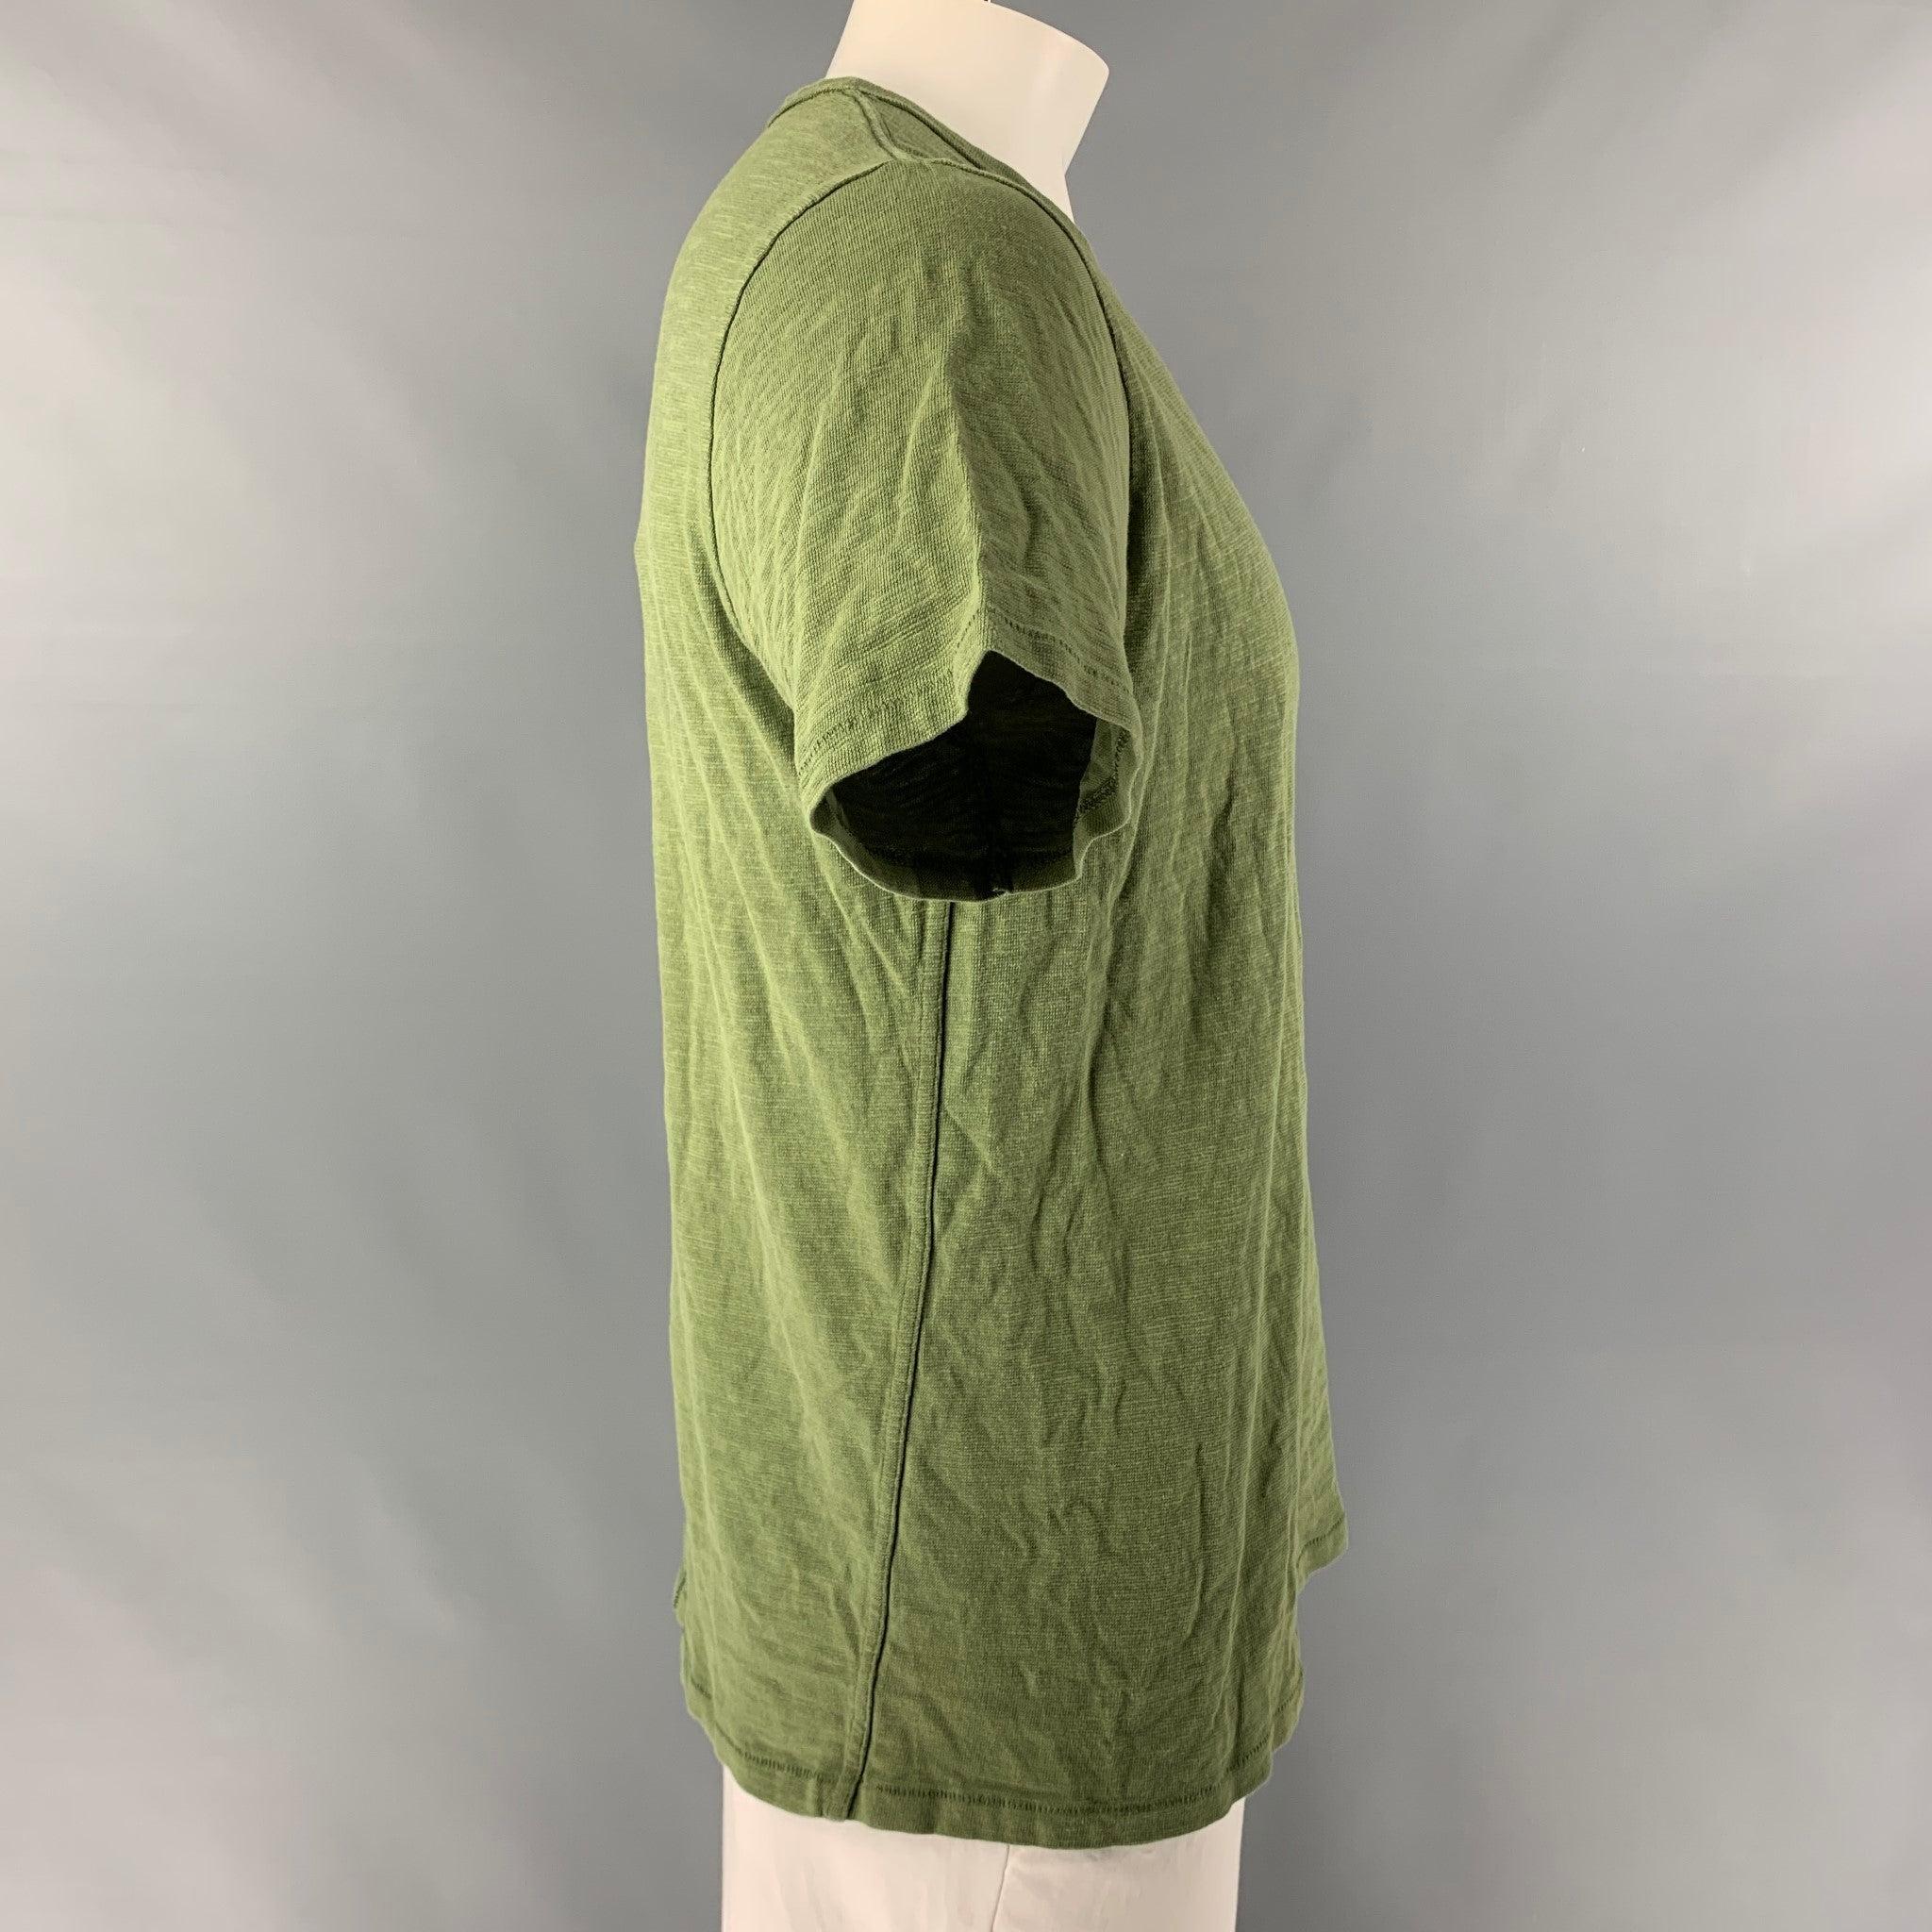 RAG & BONE
 t-shirt comes in an olive textured heather knit cotton jersey featuring a crew-neck and center back seam. Excellent Pre- Owned Conditions. 

Marked:   L 

Measurements: 
 
Shoulder: 16.5 inches Chest: 49 inches Sleeve: 8 inches Length: